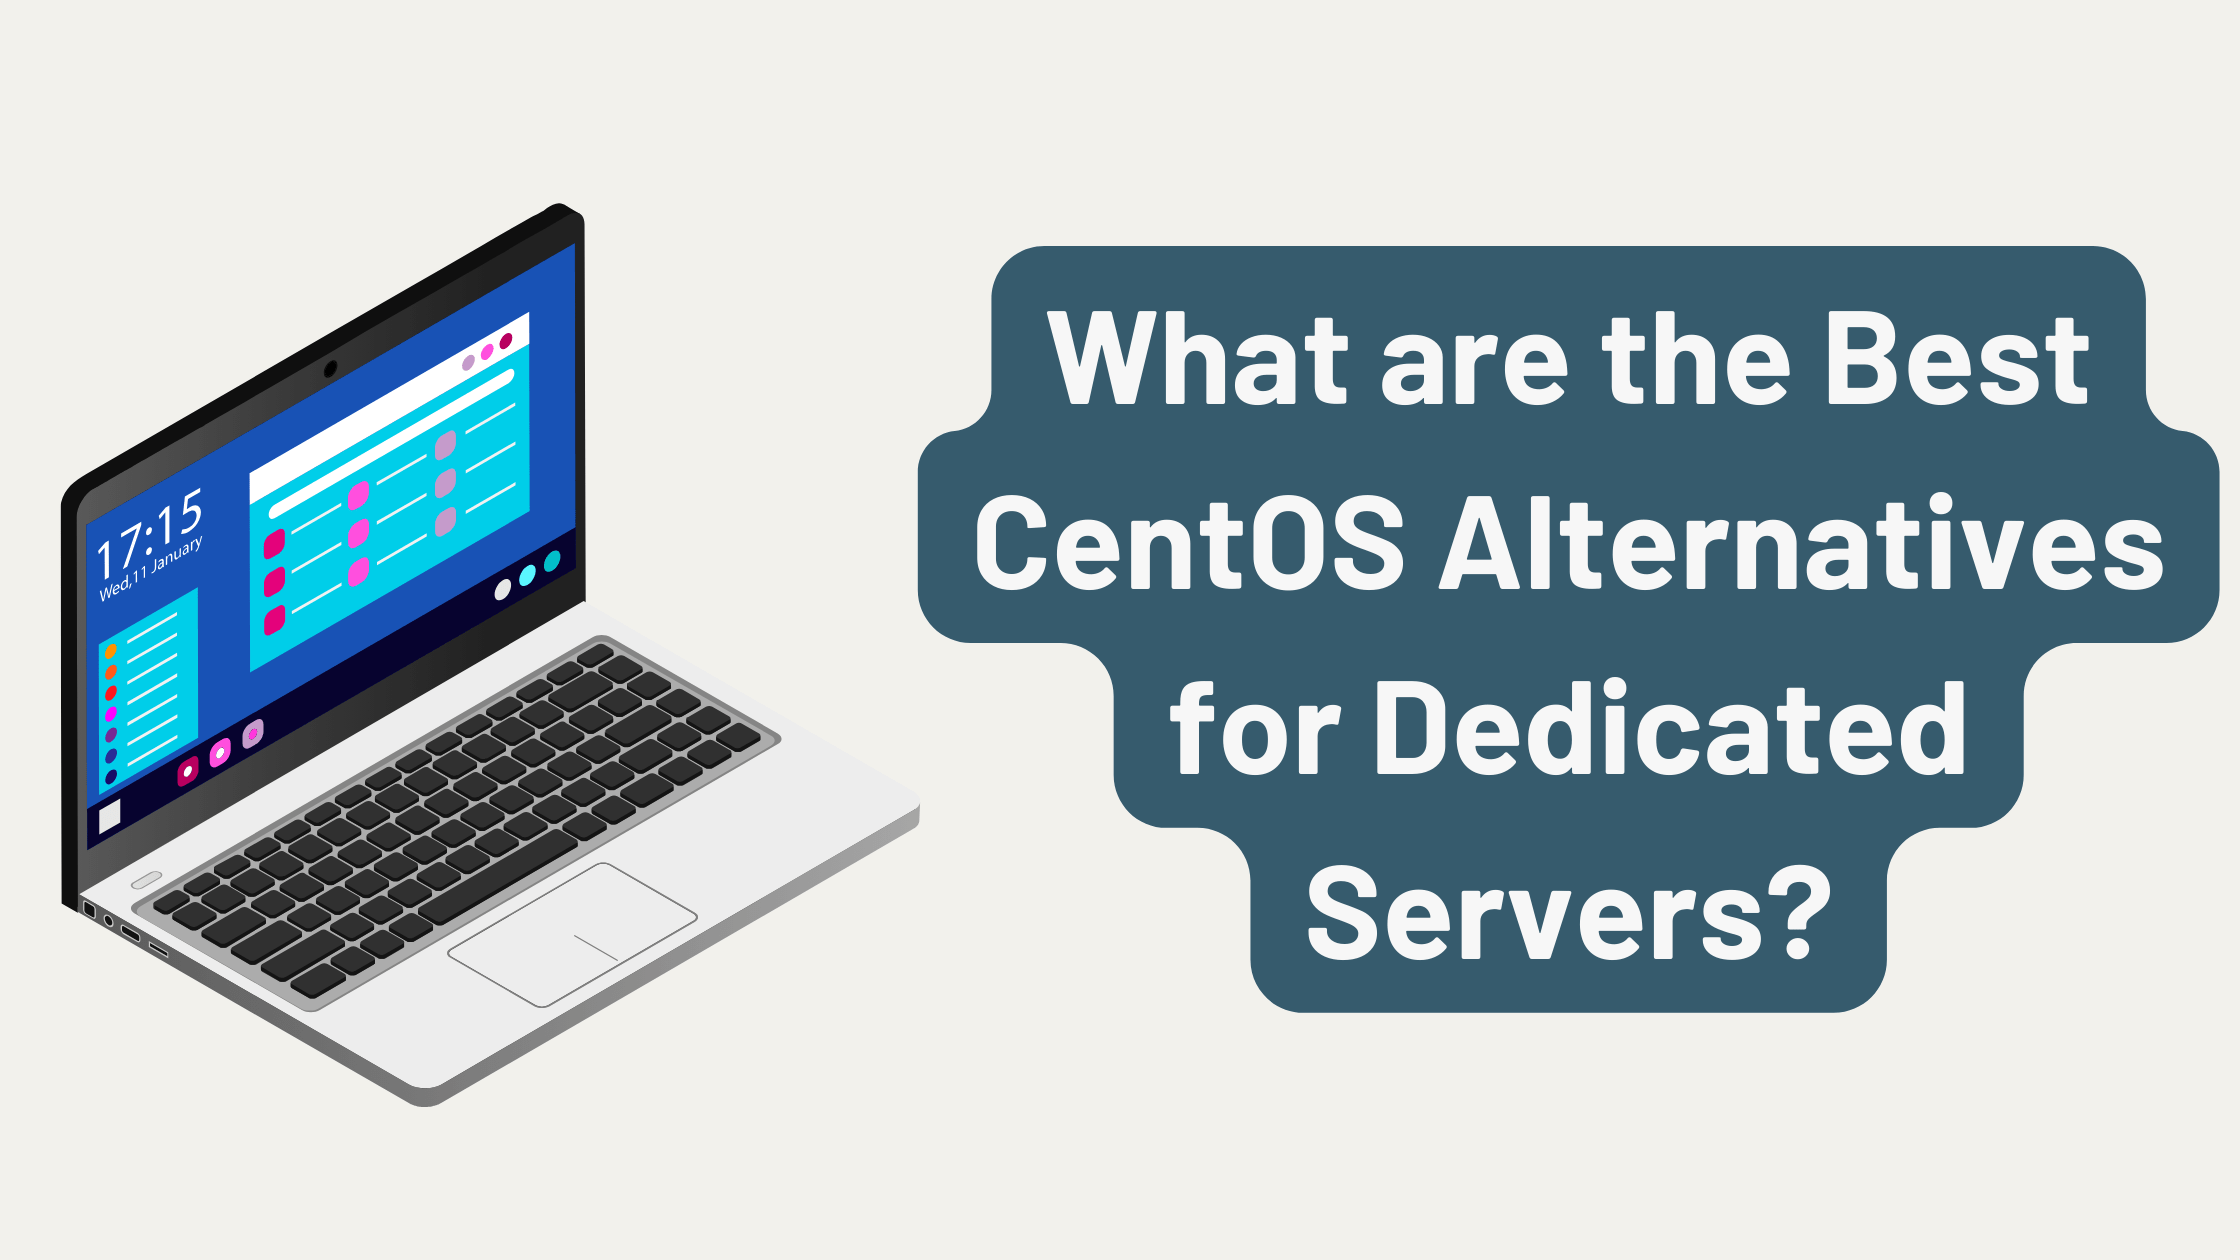 What are the Best CentOS Alternatives for Dedicated Servers?